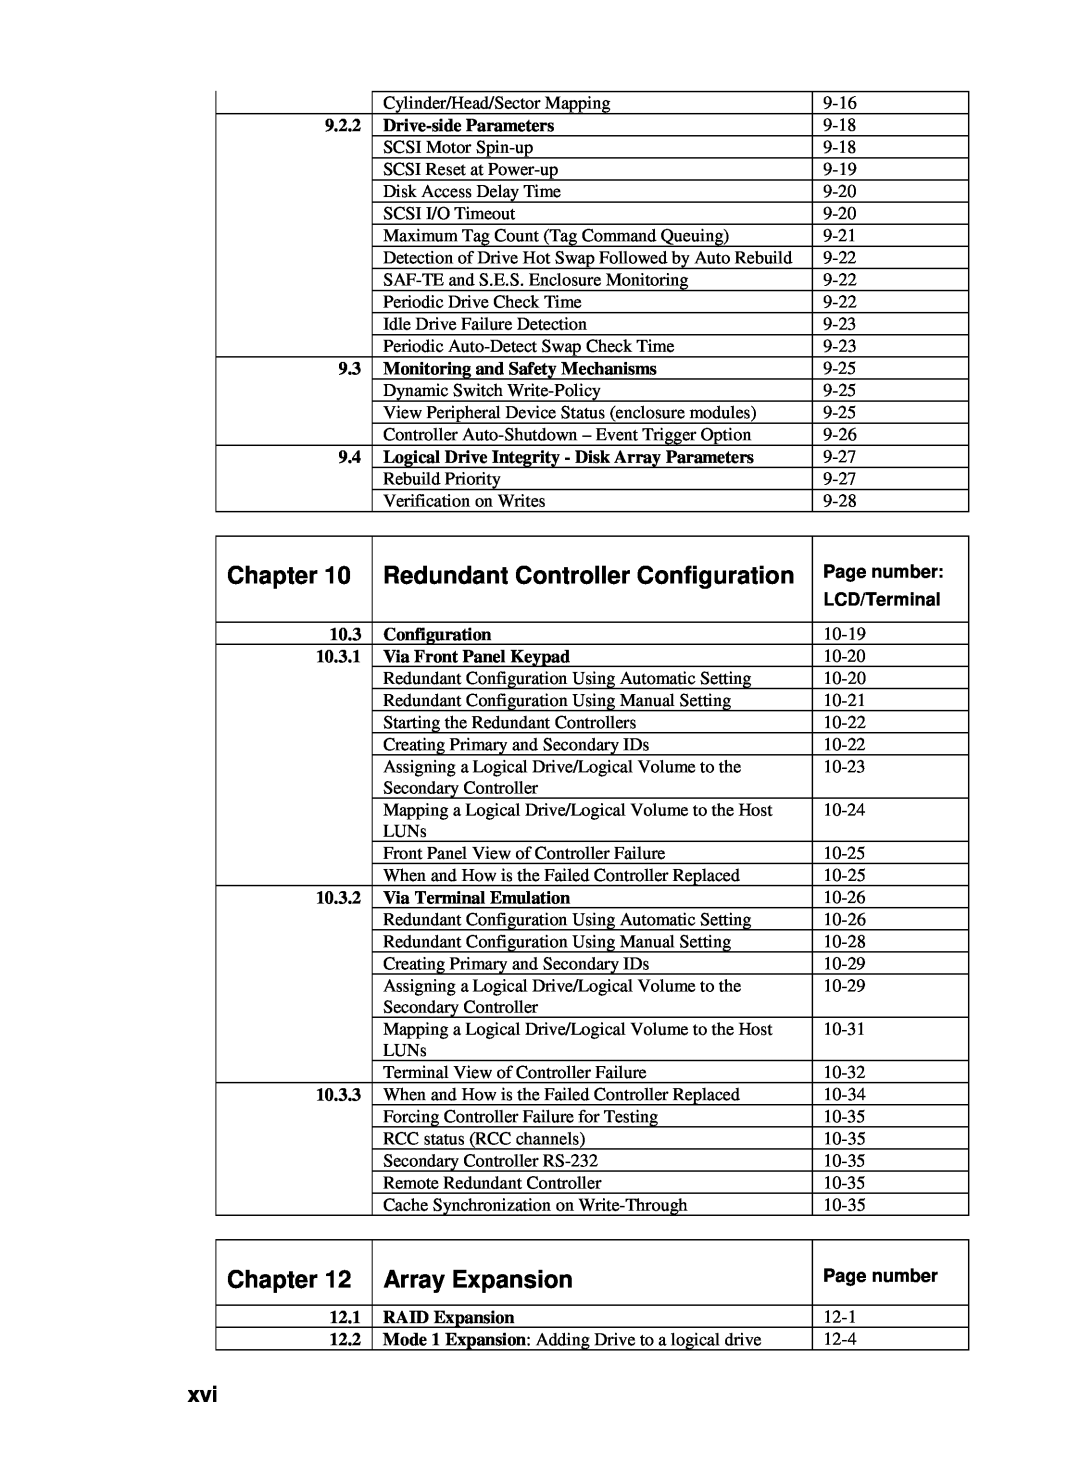 Compaq Infortrend manual Redundant Controller Configuration, Array Expansion, Chapter, 9.2.2 